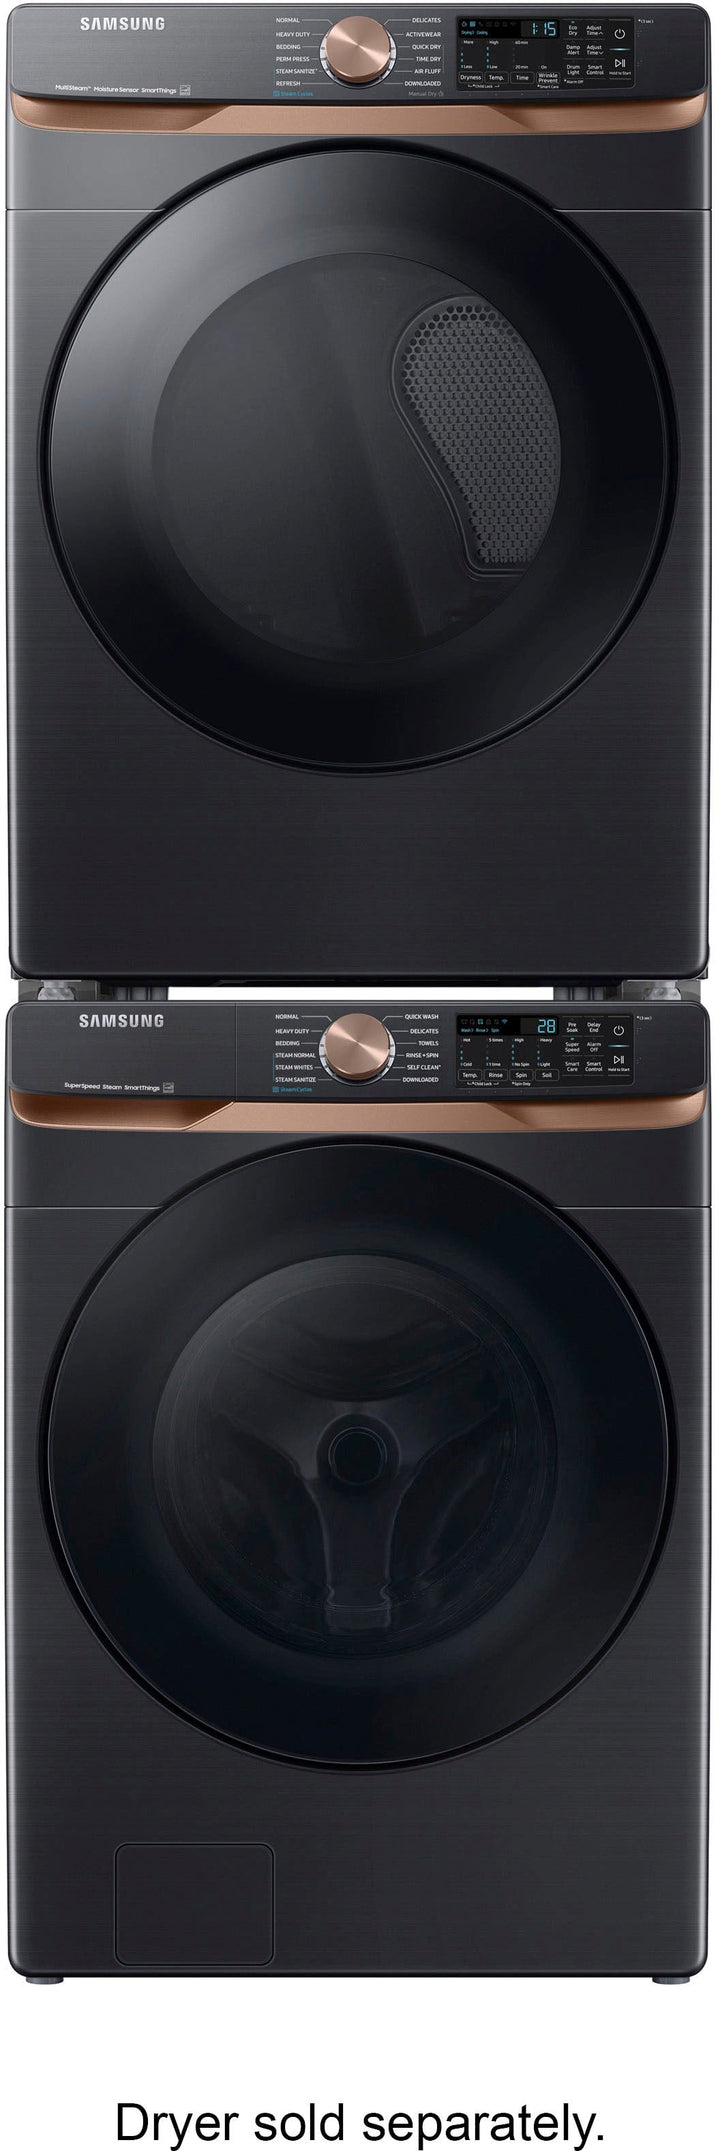 Samsung - 5.0 cu. ft. Extra Large Capacity Smart Front Load Washer with Super Speed Wash and Steam - Brushed black_4